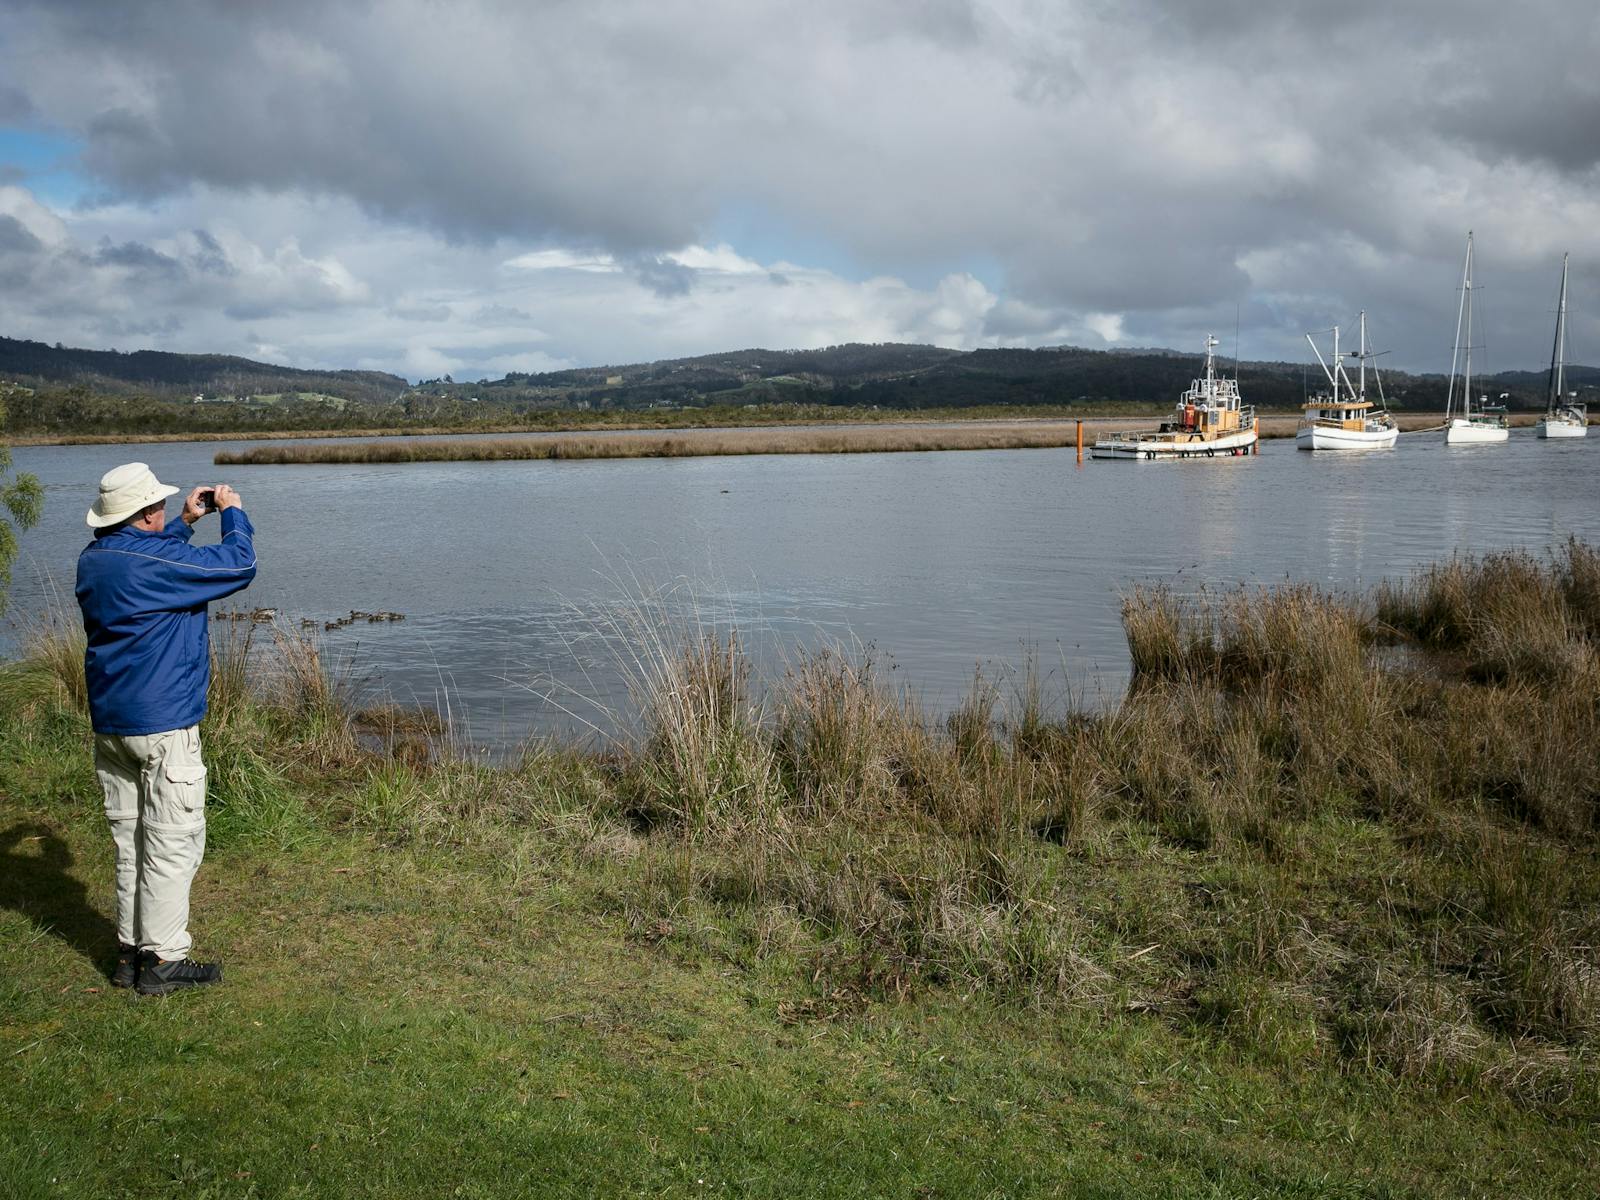 Guest standing at the edge of the Huon River pointing camera to boats on the water